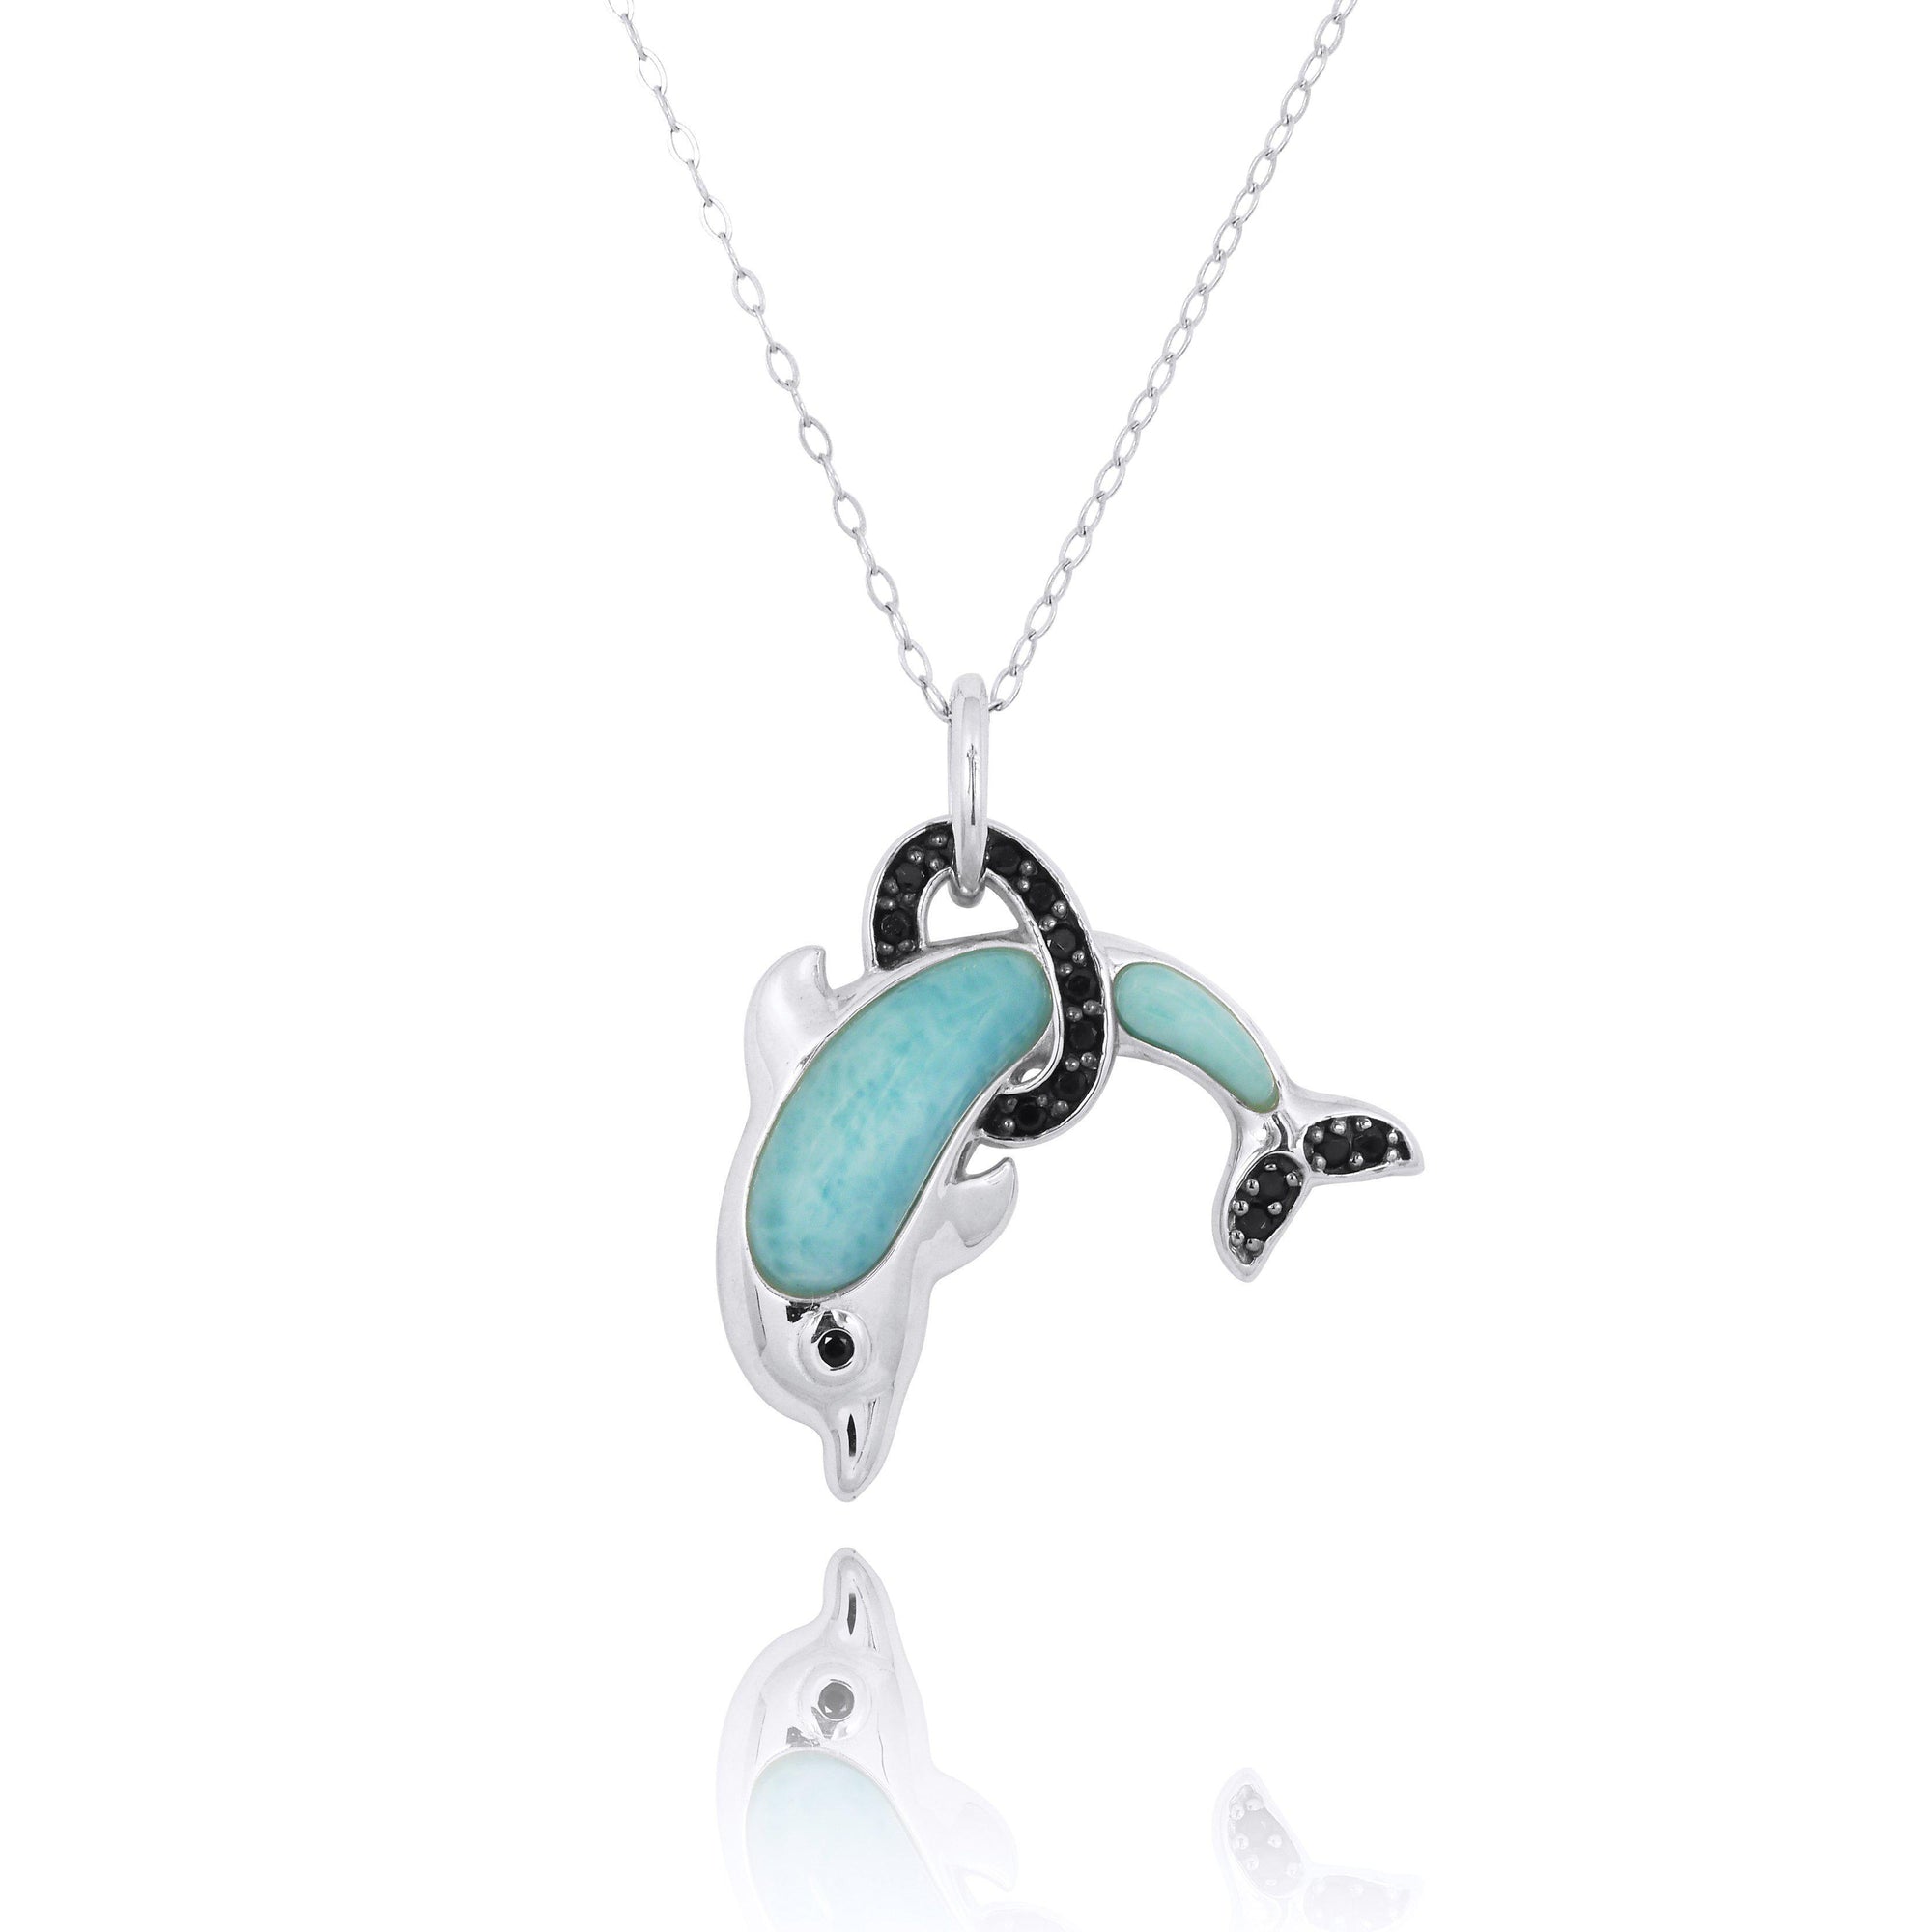 Dolphin Necklace with Larimar and Black Spinel - Miami